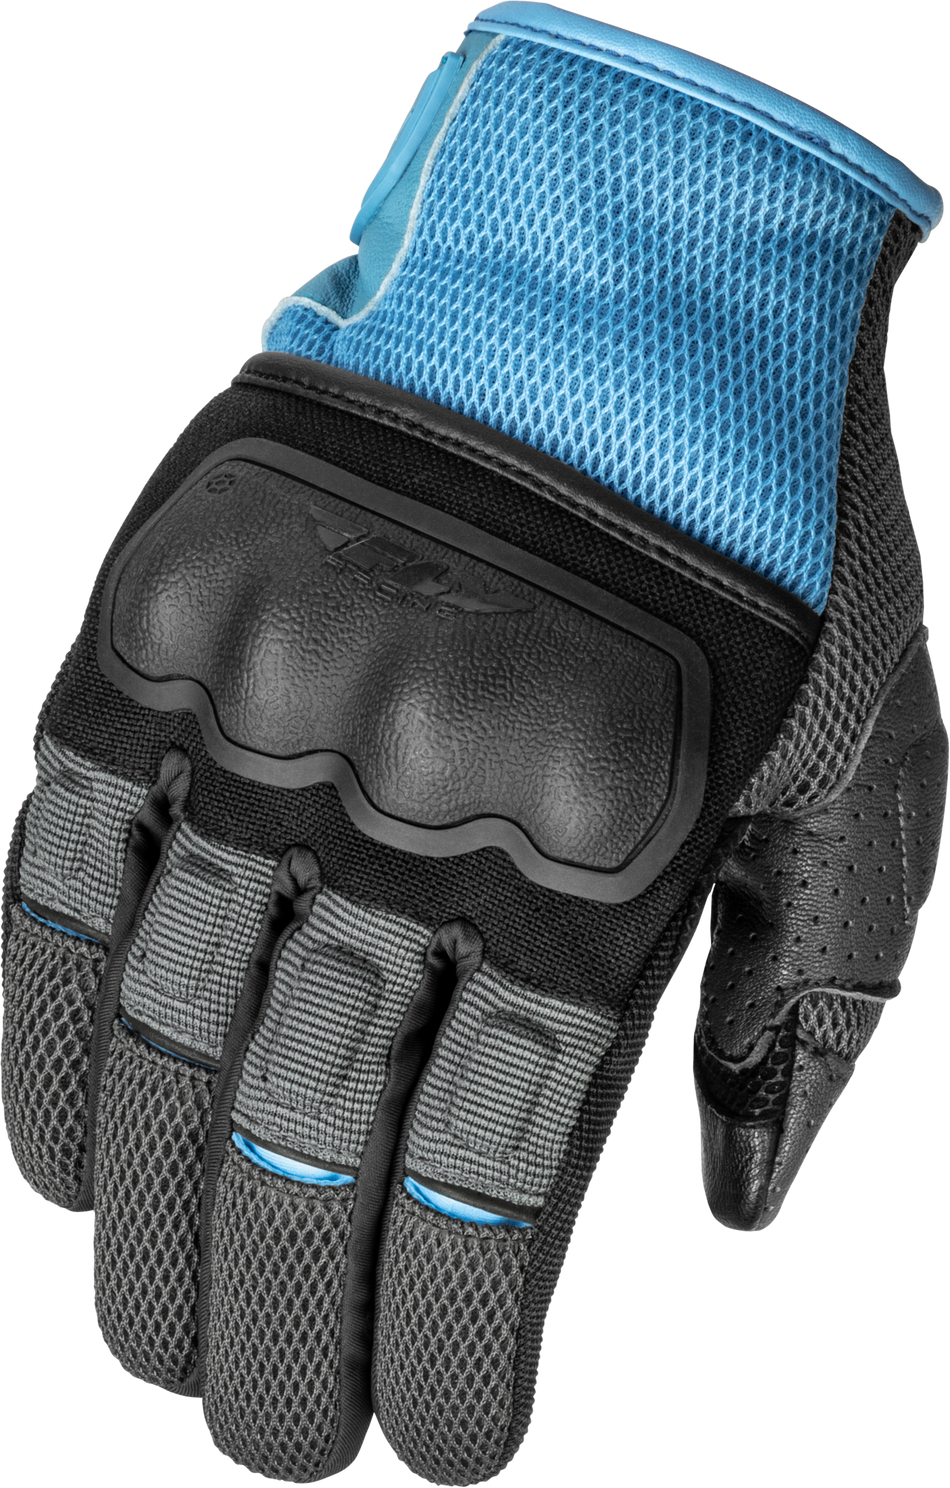 FLY RACING Women's Coolpro Force Gloves Grey/Blue Lg 476-6303L